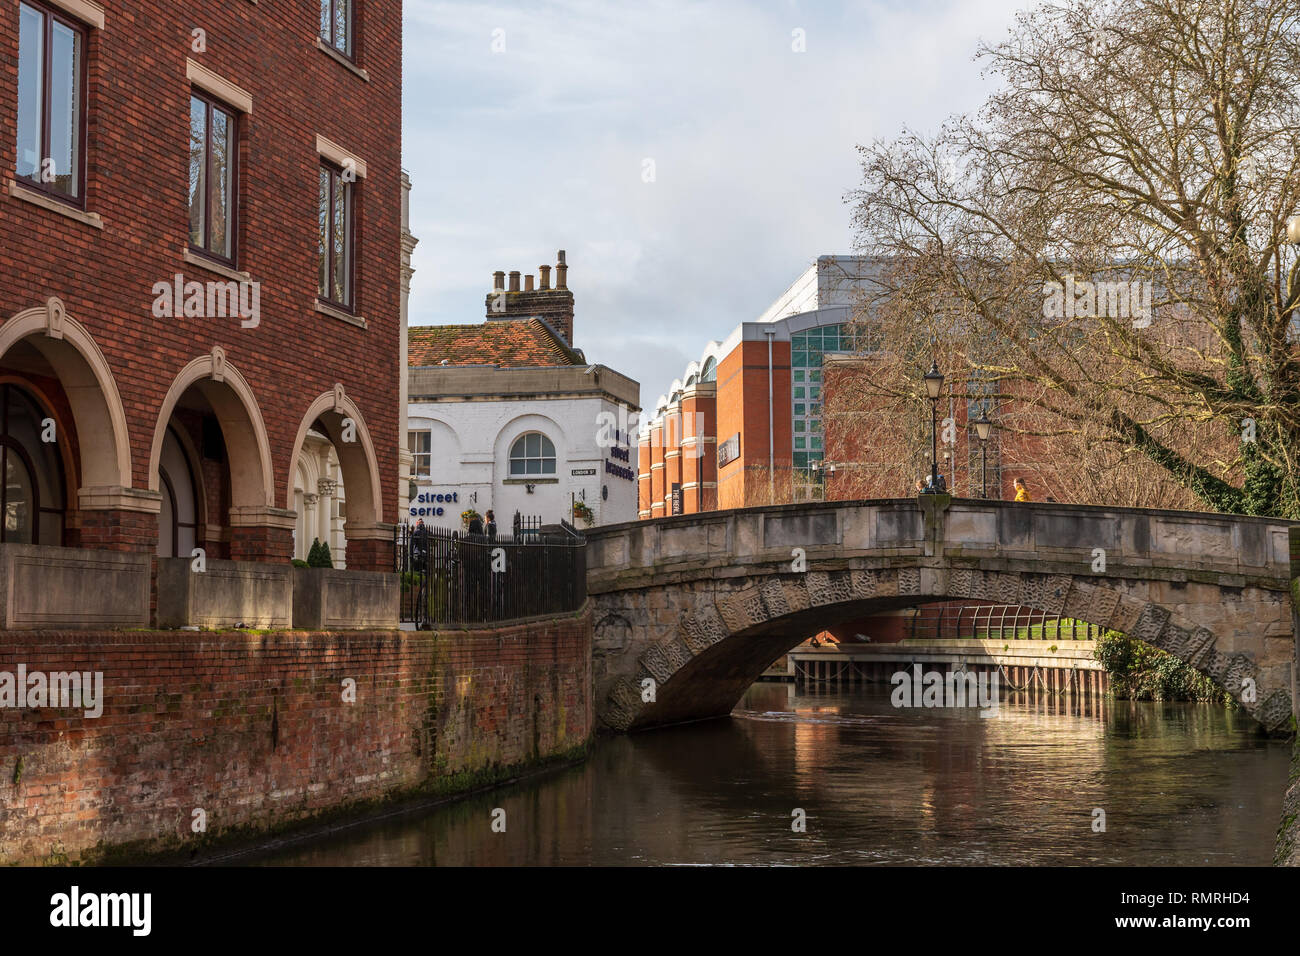 The London Street Bridge over the River Kennet in Reading Stock Photo